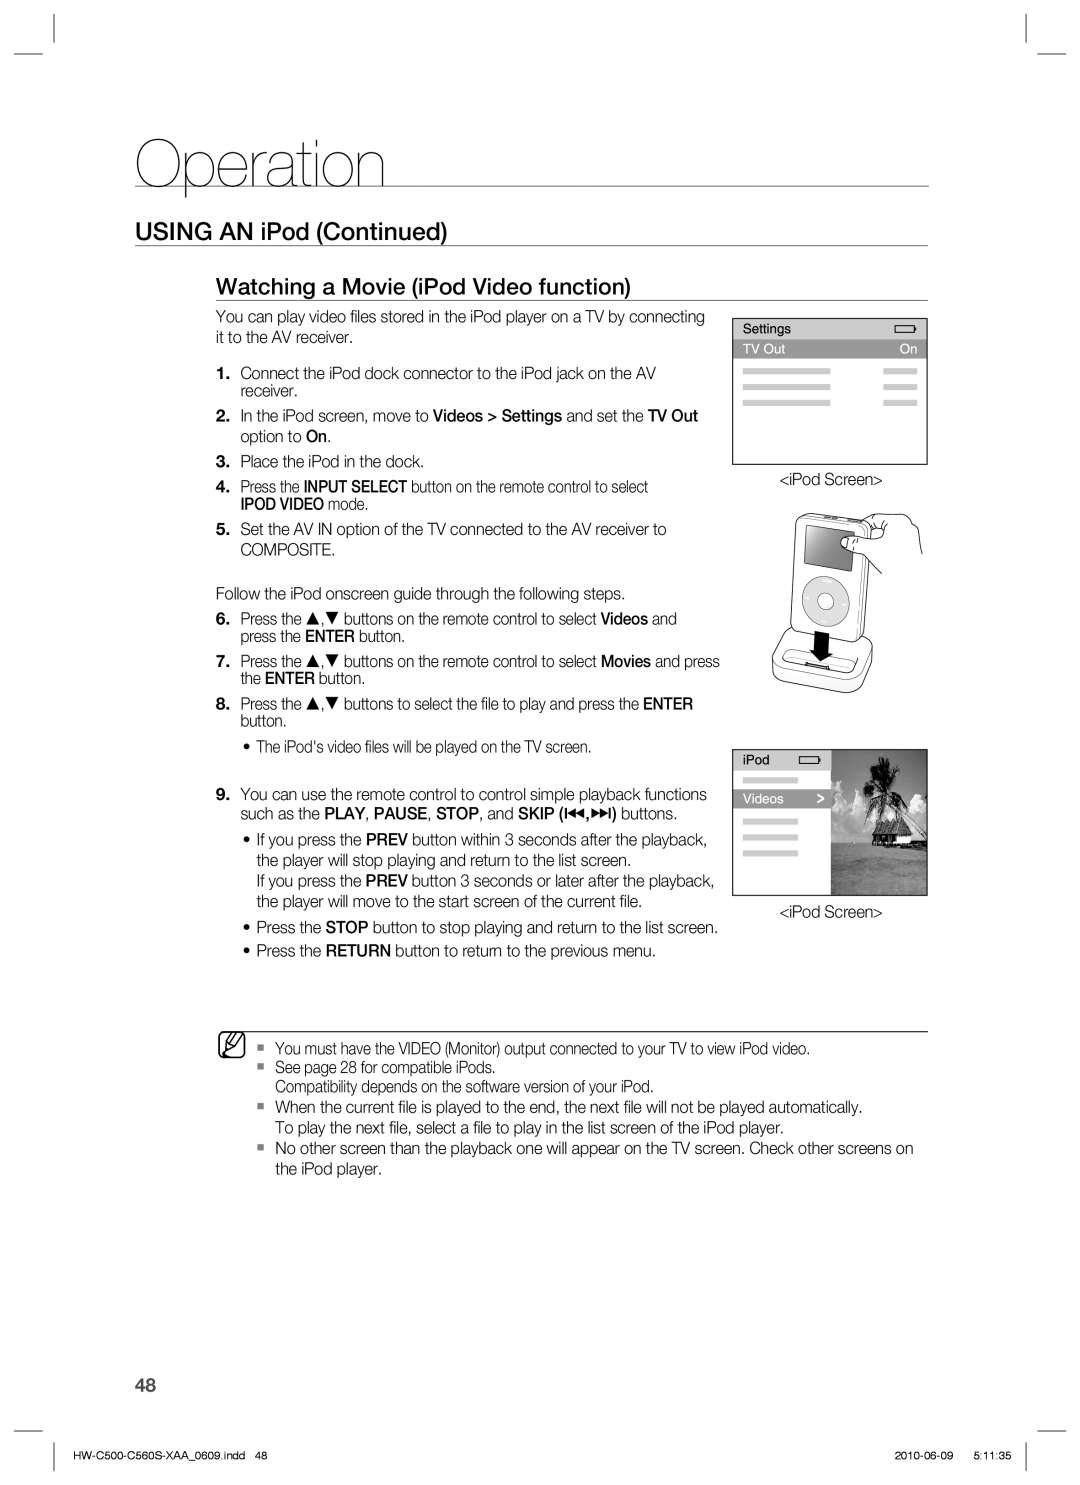 Samsung HW-C500, HW-C560S user manual USING AN iPod Continued, Watching a Movie iPod Video function, Operation 